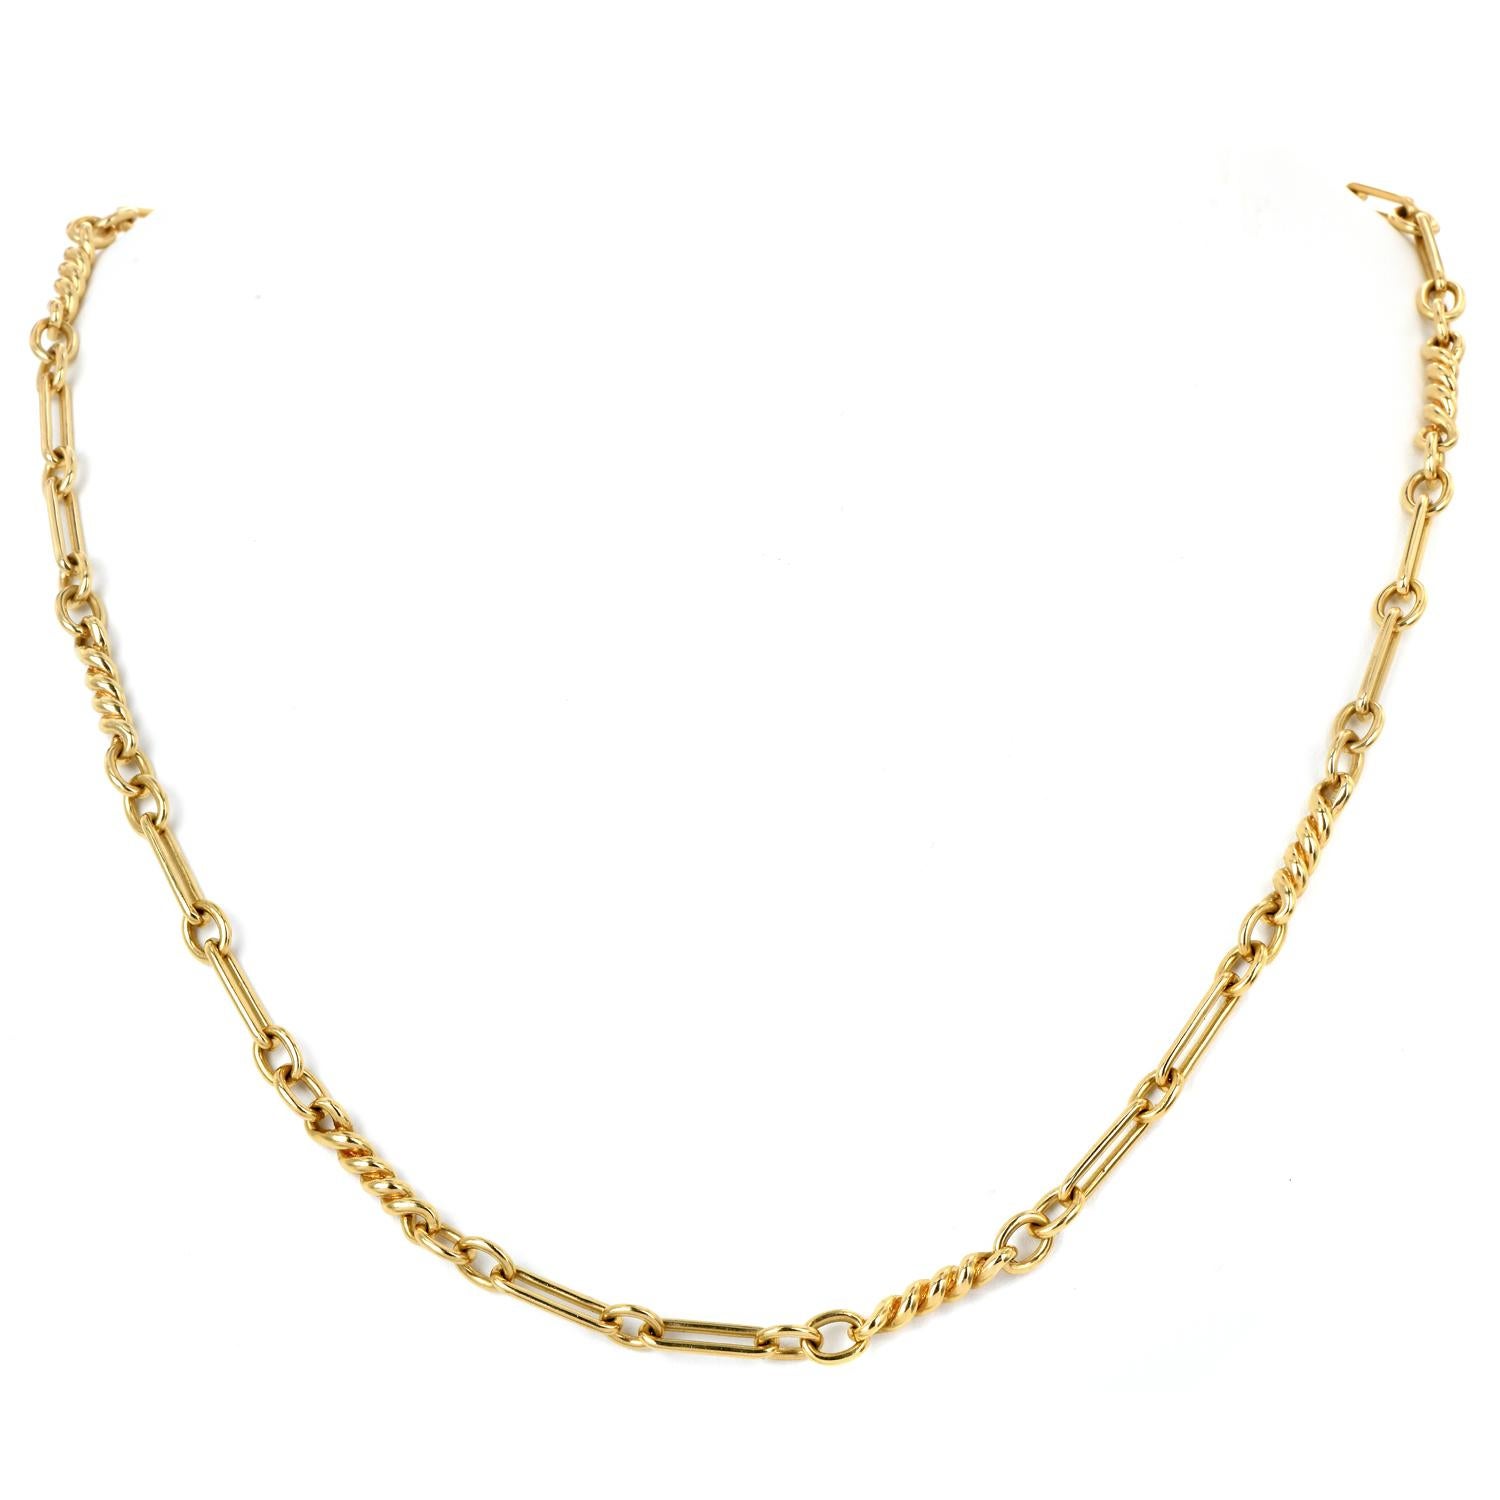 An Elegant and Fancy unisex link chain necklace.

From the Designer David Webb.

Is Crafted in solid 18K yellow gold, featuring a combination of twisted ropes and oval polished links.

The complete piece is approximately 22'', with a Multi hoop link